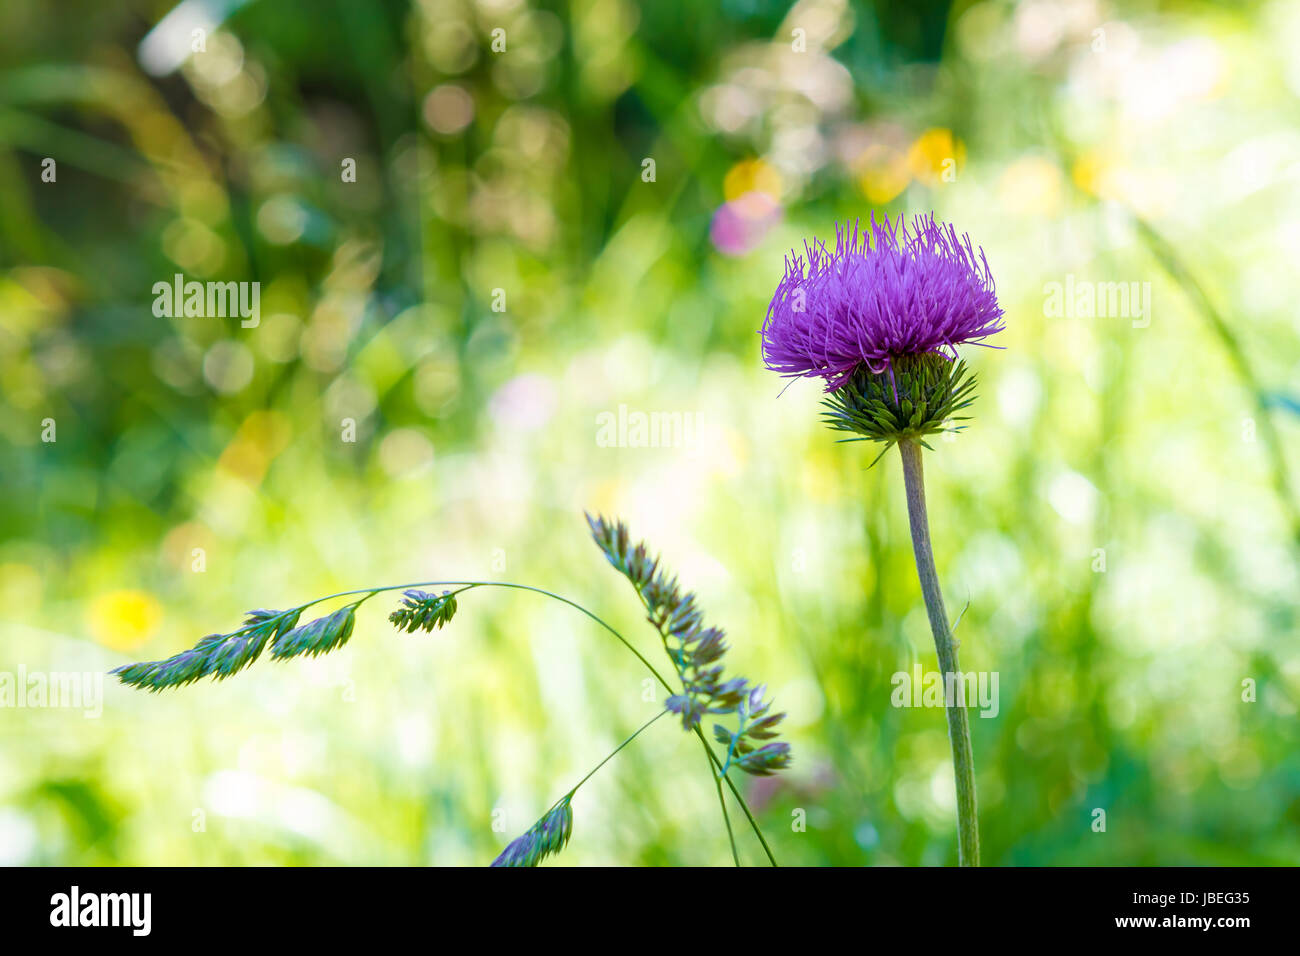 closeup of a violet flower welted thistle or carduus crispus plant in its own natural habitat Stock Photo